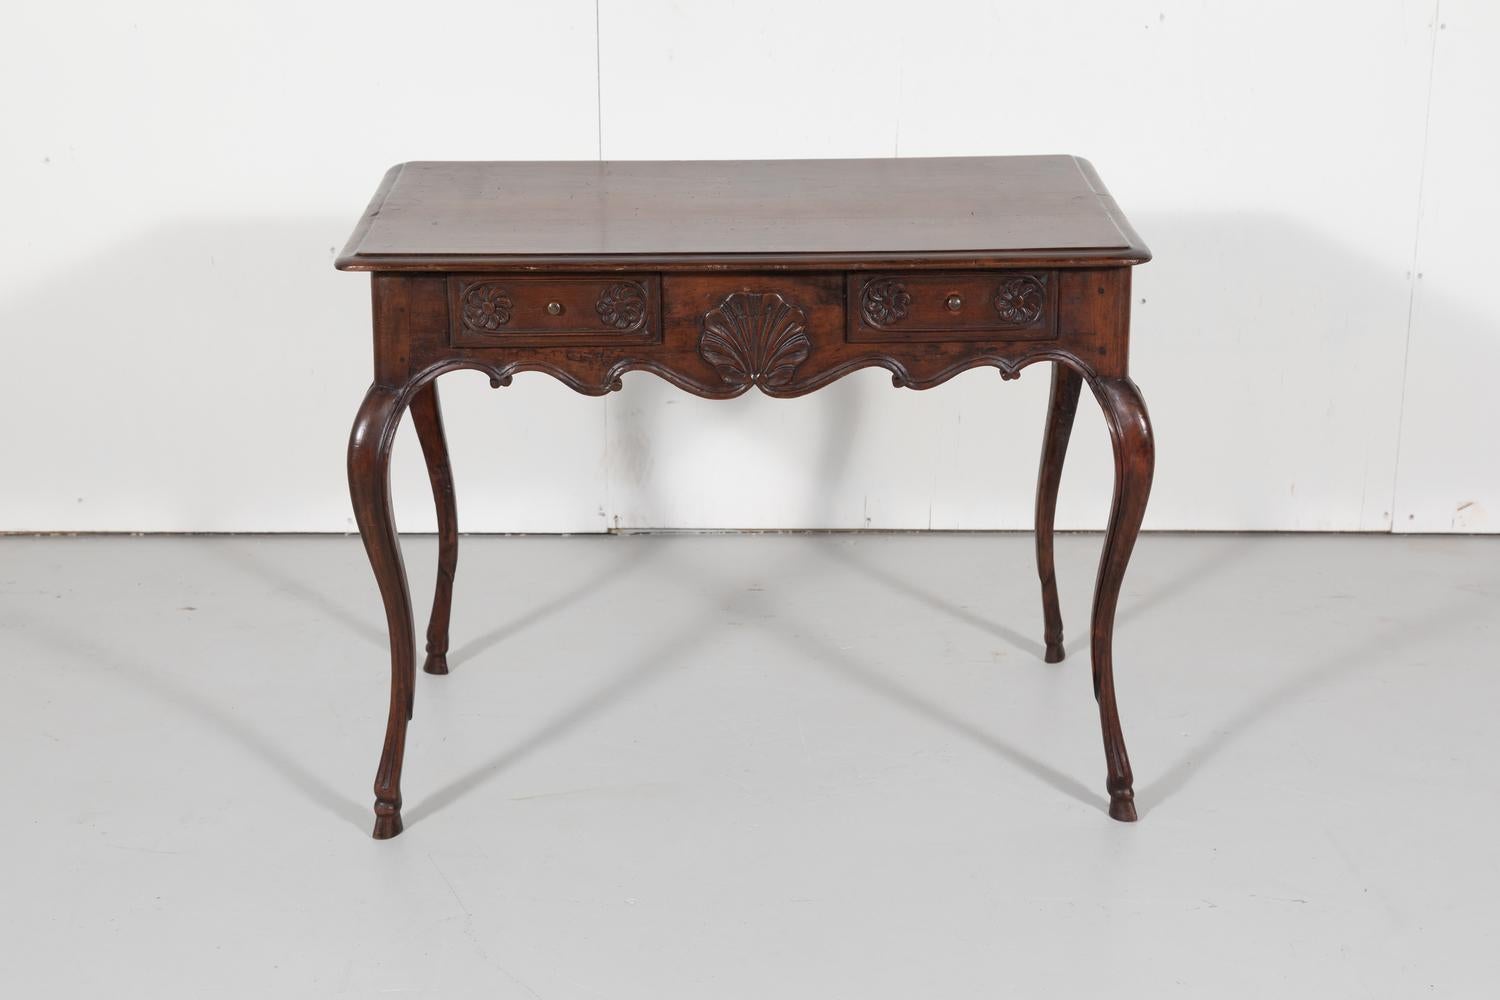 Fine 18th century French Louis XV period side table or ladies desk handcrafted in solid French walnut by talented artisans near Lyon. This richly carved French table features a rectangular top with moulded edges and rounded corners sitting above an